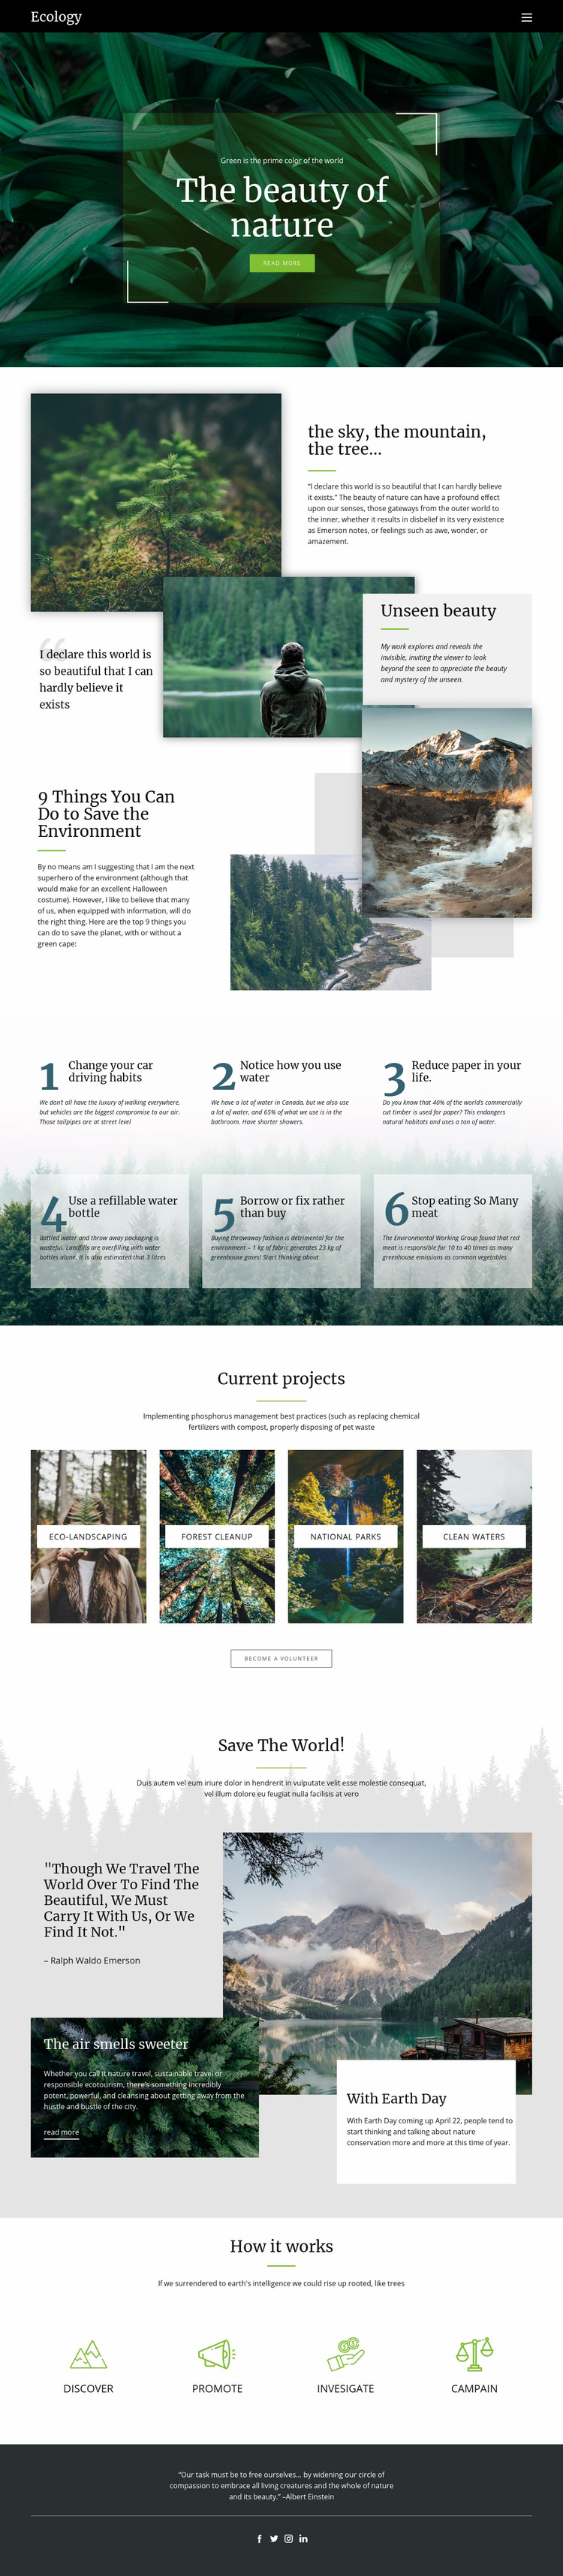 Skies and beauty of nature Web Page Design